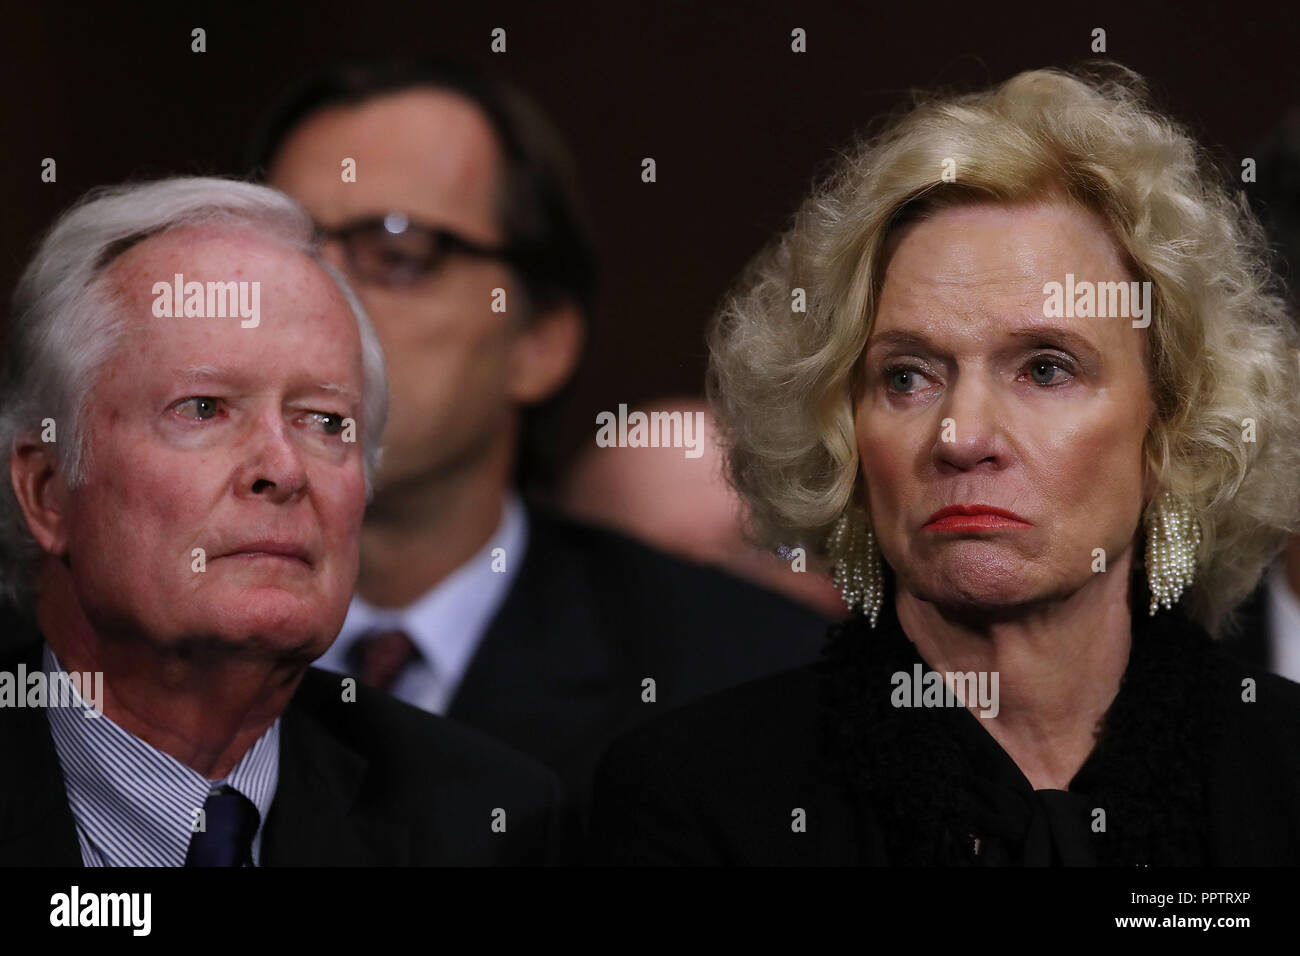 Washington, DC, USA. 27th Sep, 2018. Judge Brett Kavanaugh's parents, Everett and Martha Kavanaugh, listen to their son testify before the Senate Judiciary Committee during his Supreme Court confirmation hearing in the Dirksen Senate Office Building on Capitol Hill September 27, 2018 in Washington, DC.  Credit: ZUMA Press, Inc./Alamy Live News. Stock Photo